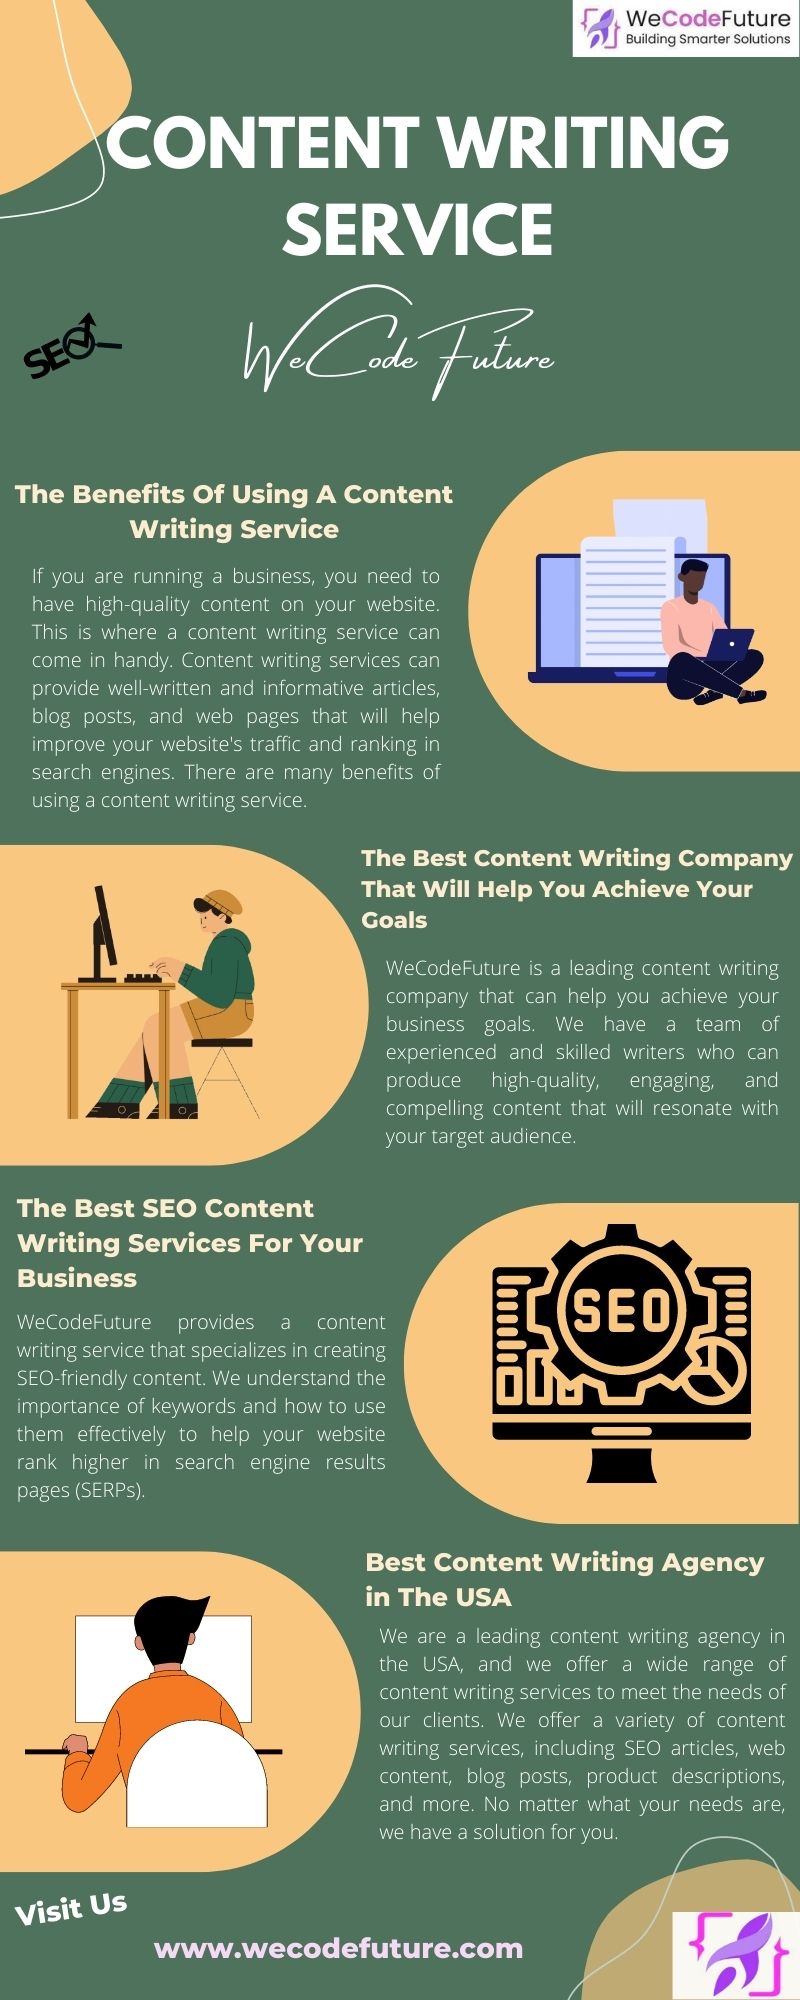 What Is A Content Writing Service?